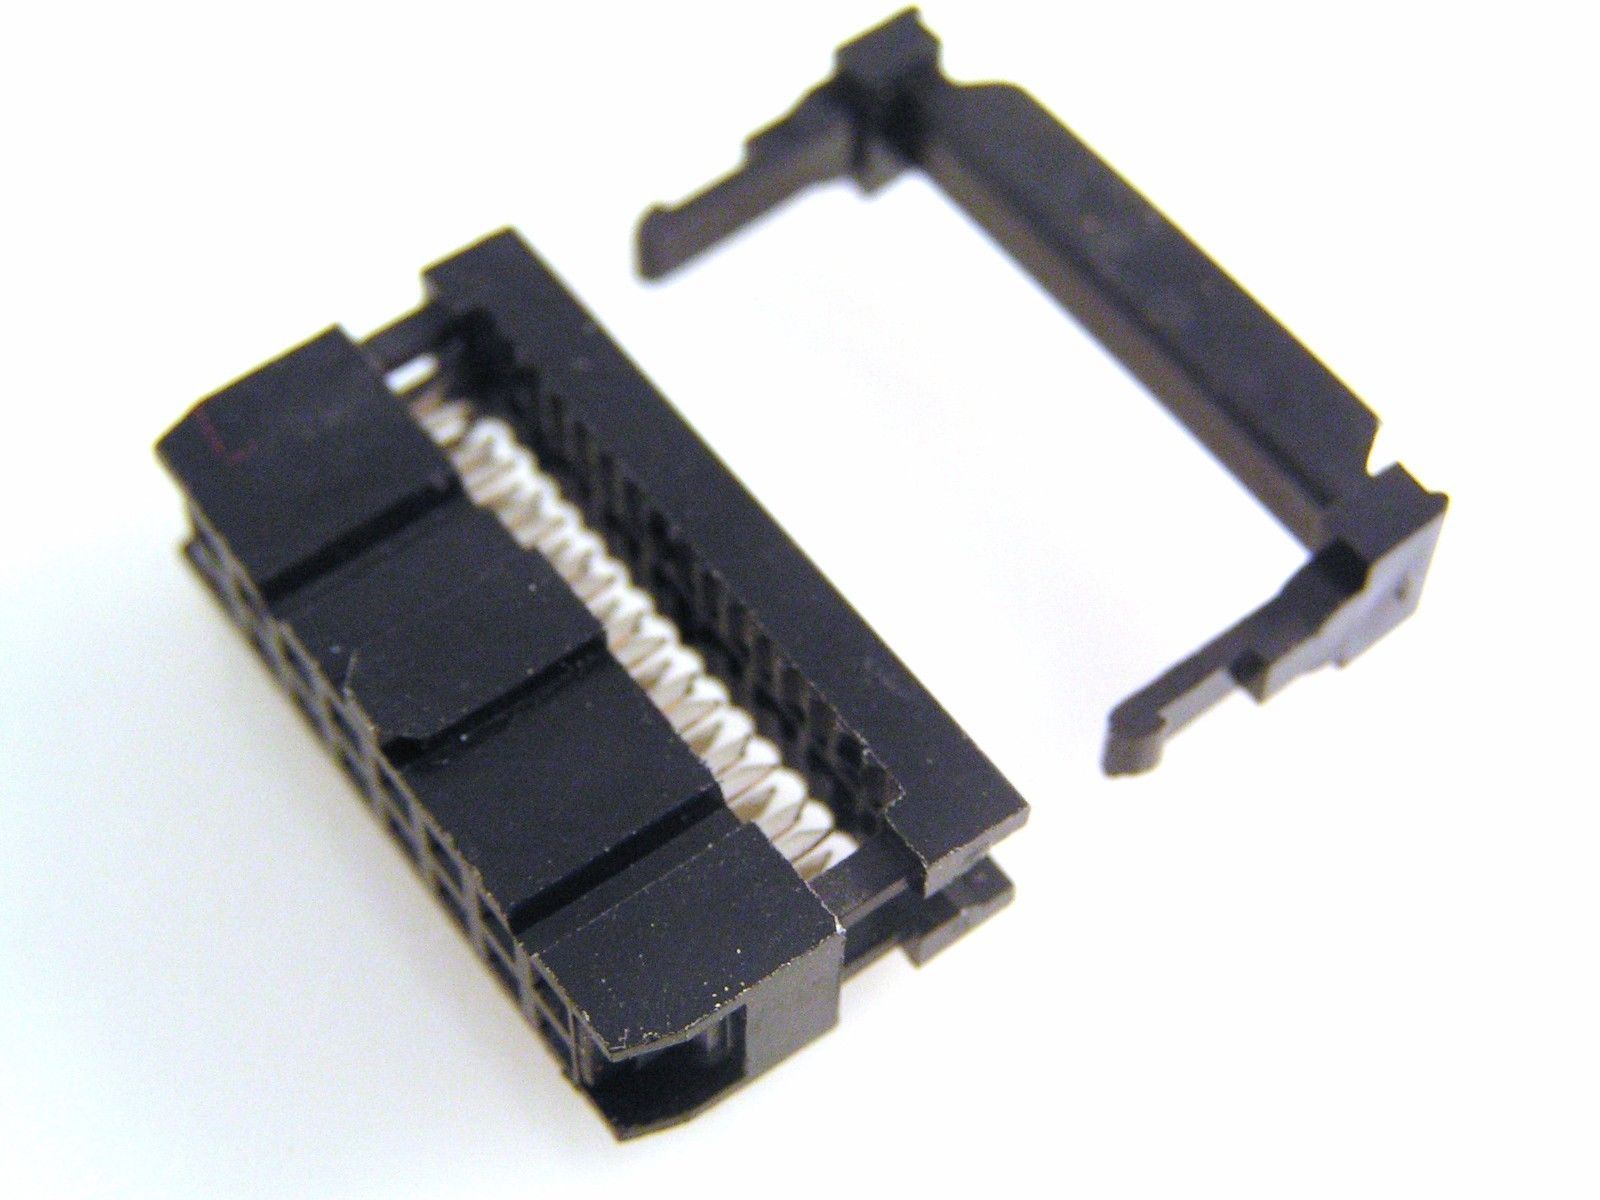 Ribbon Cable Dil Idc Socketstrain Relief 254mm Polarised Range 10to64